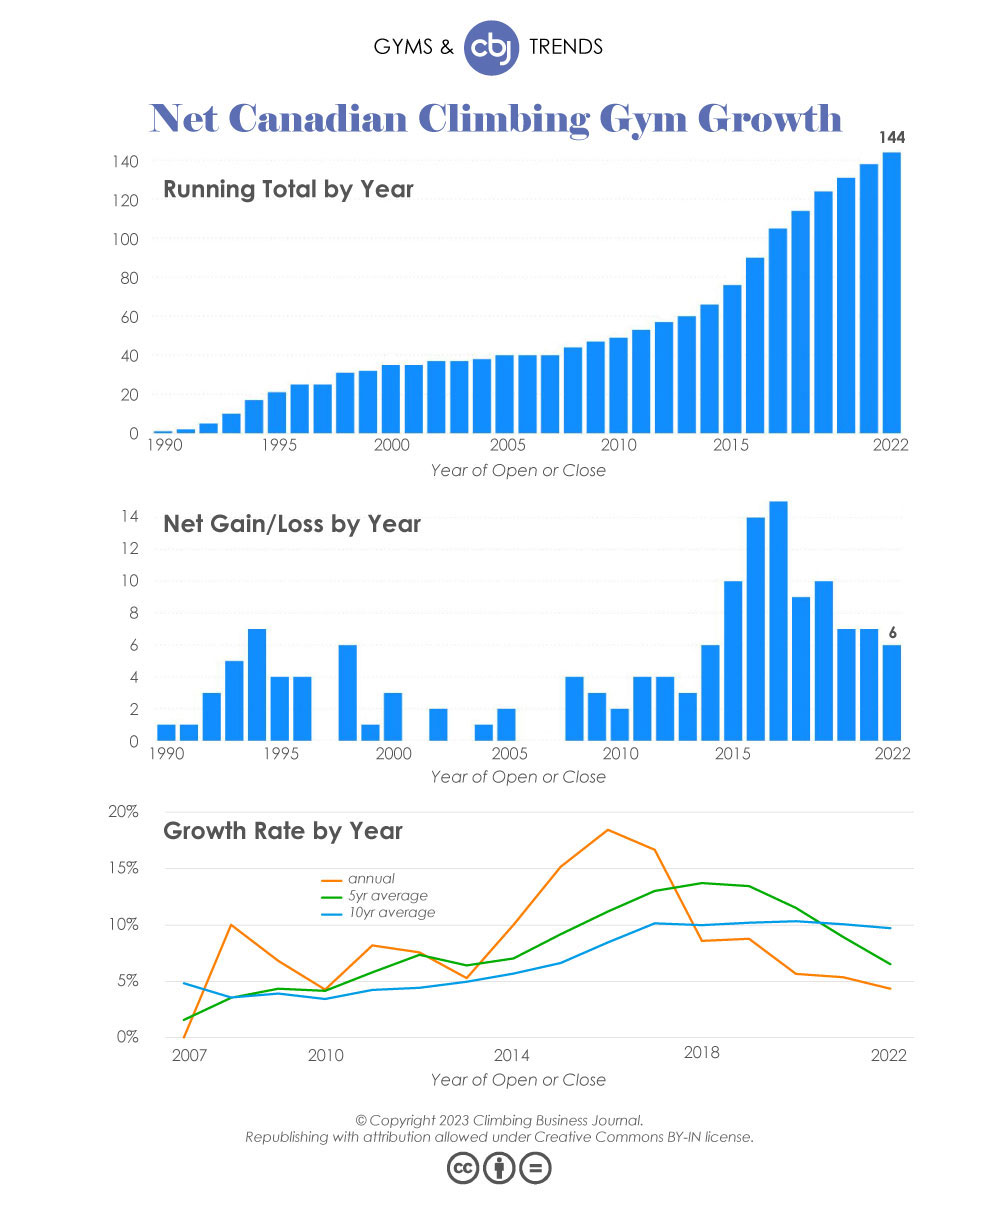 Chart of net Canadian climbing gym growth from 1990 to 2022